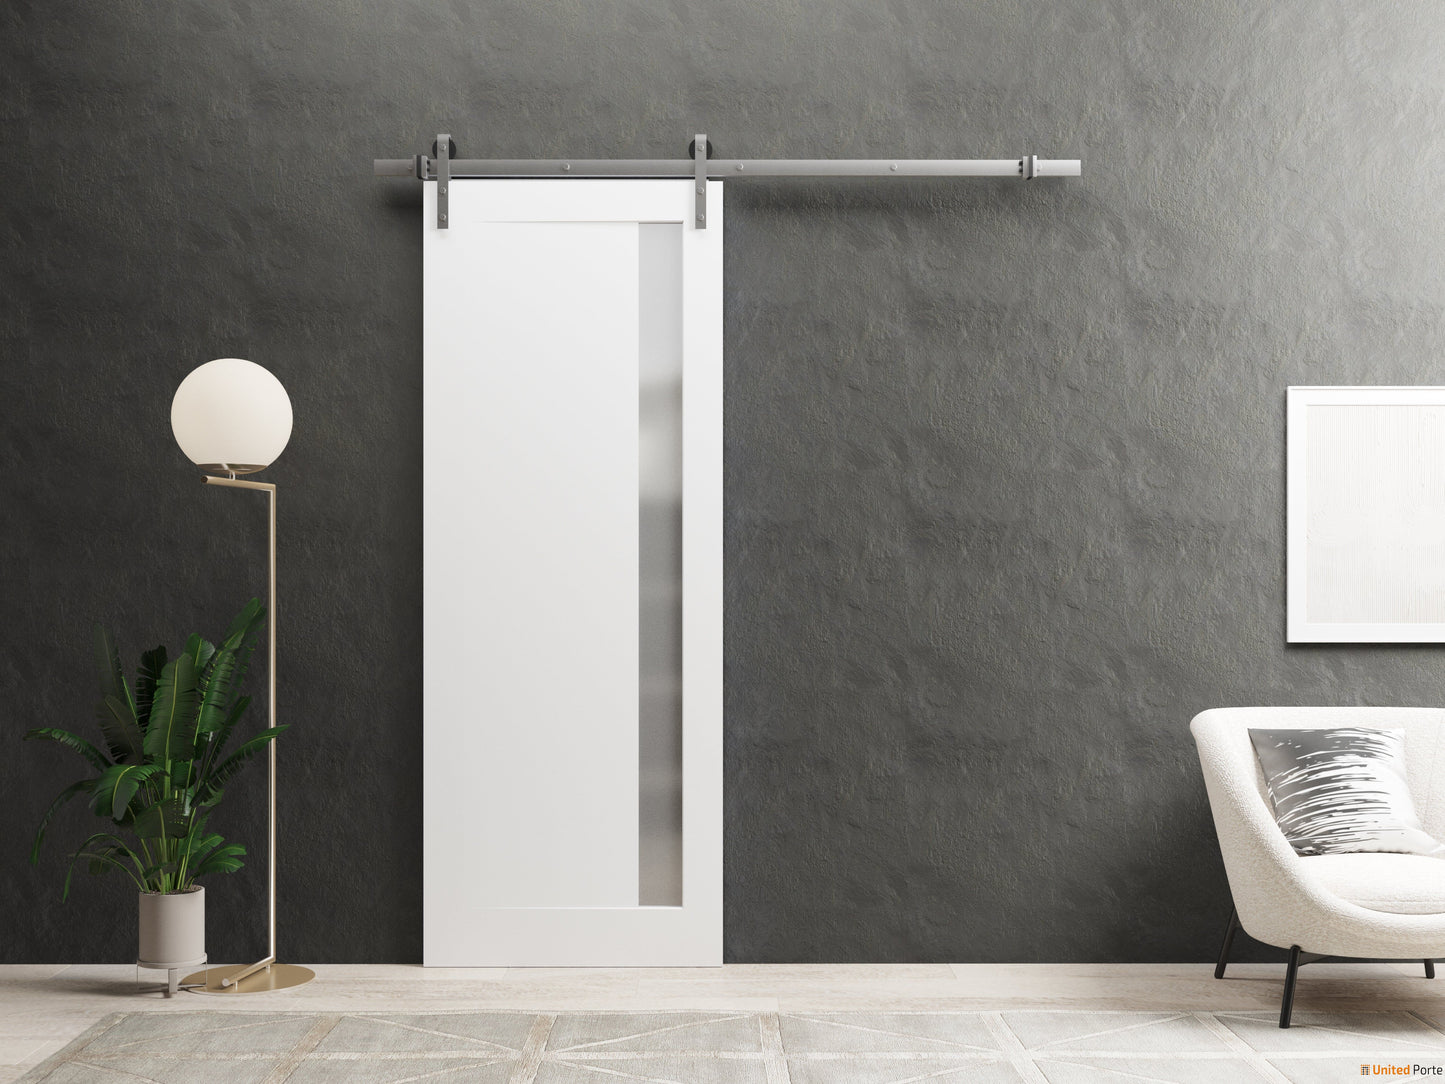 Planum 0660 Painted White Barn Door with Frosted Glass and Silver Rail